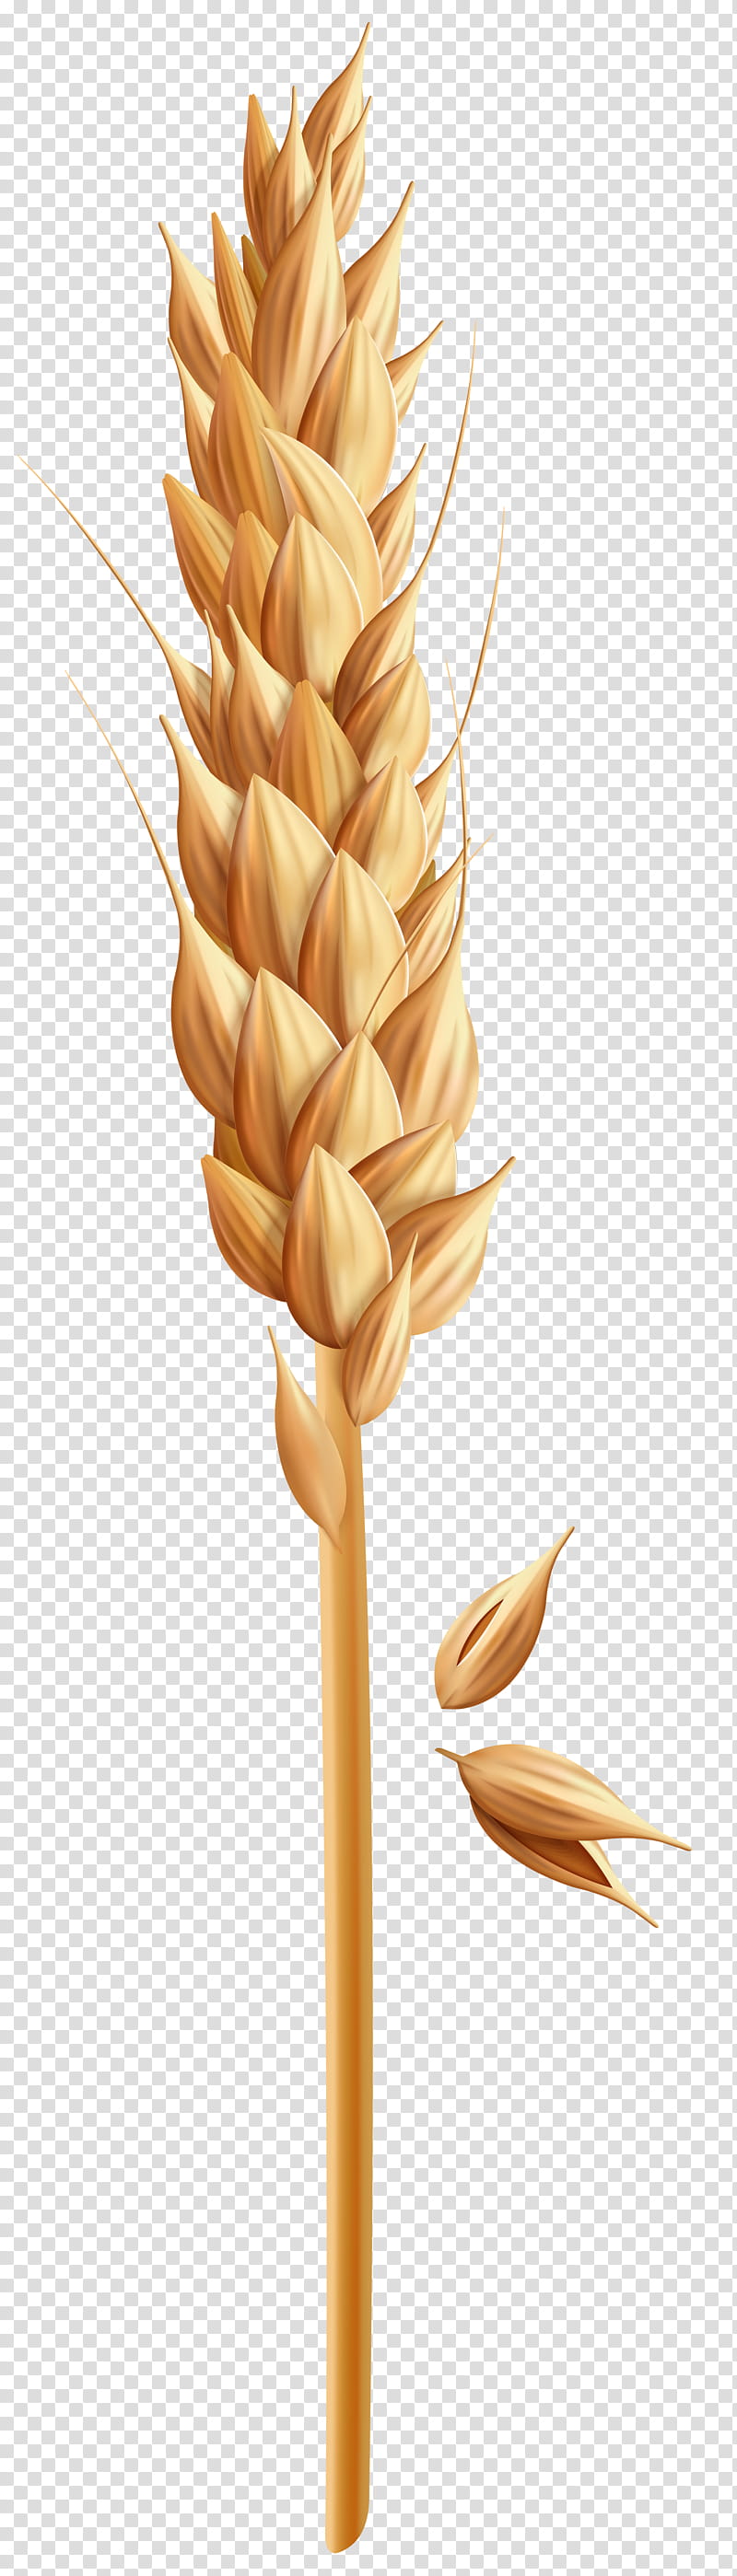 Cartoon Grass, Cereal, Wheat, Grain, Grasses, Whole Grain, Rice, Ear transparent background PNG clipart